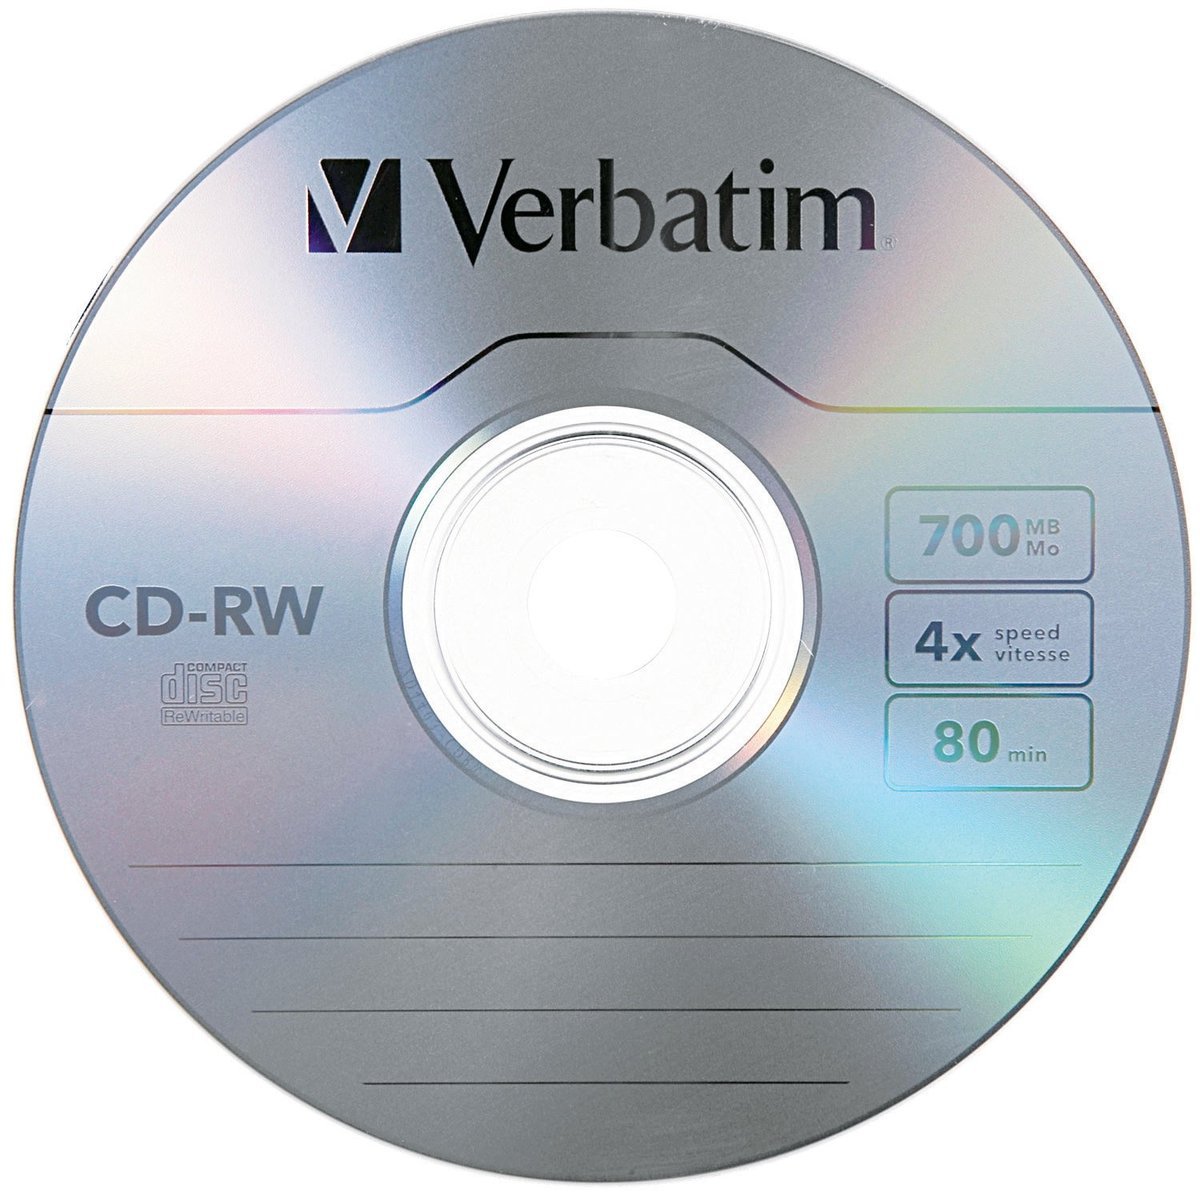 How Many Songs Can A 700MB CD Hold In MP3 Format